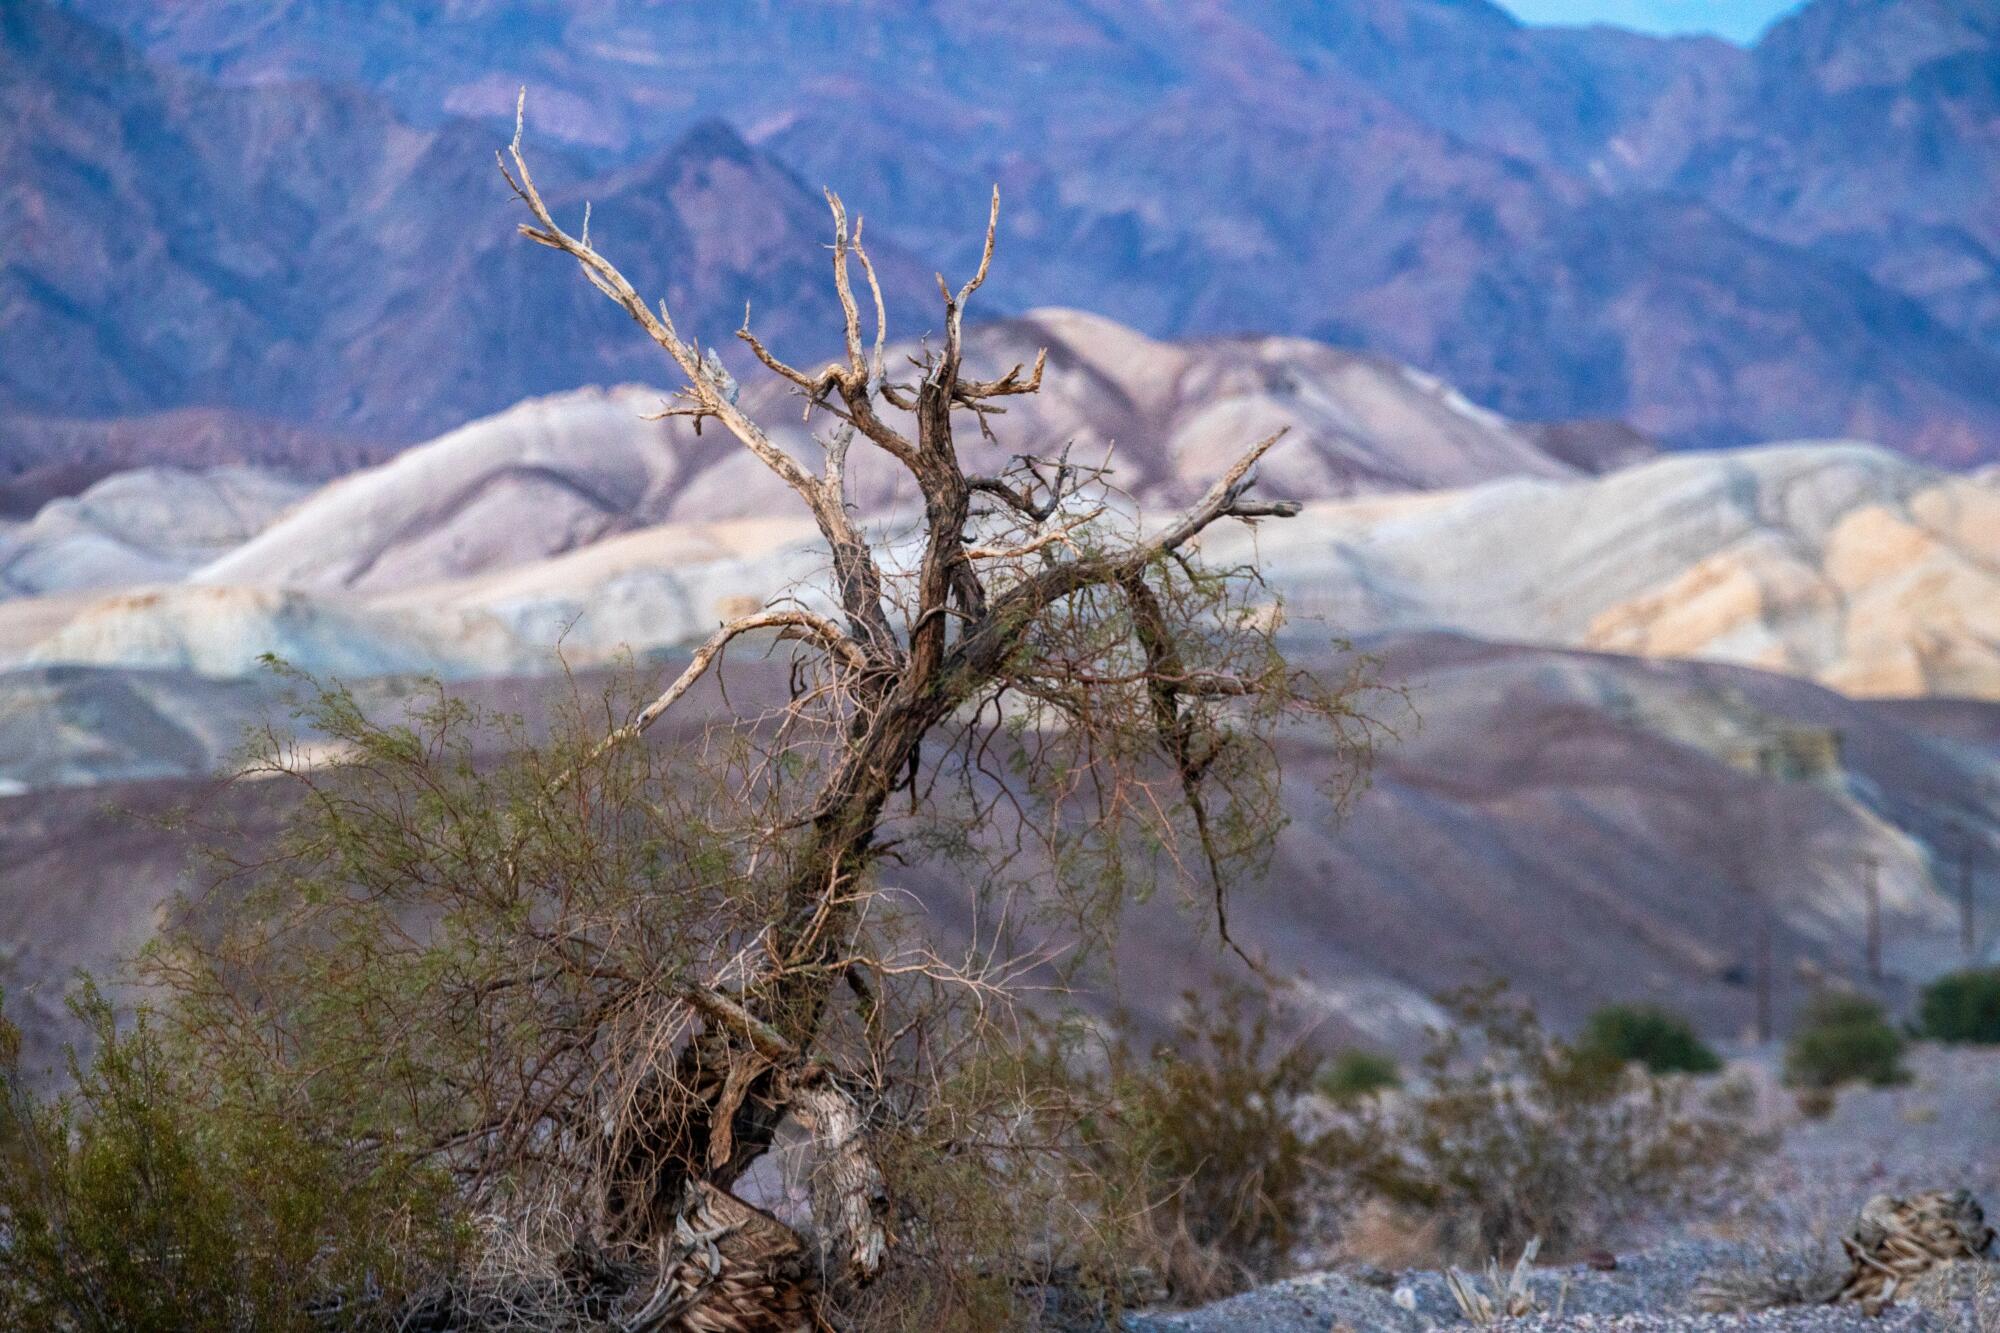 The branches of a parched tree are splayed before a backdrop of barren hills.